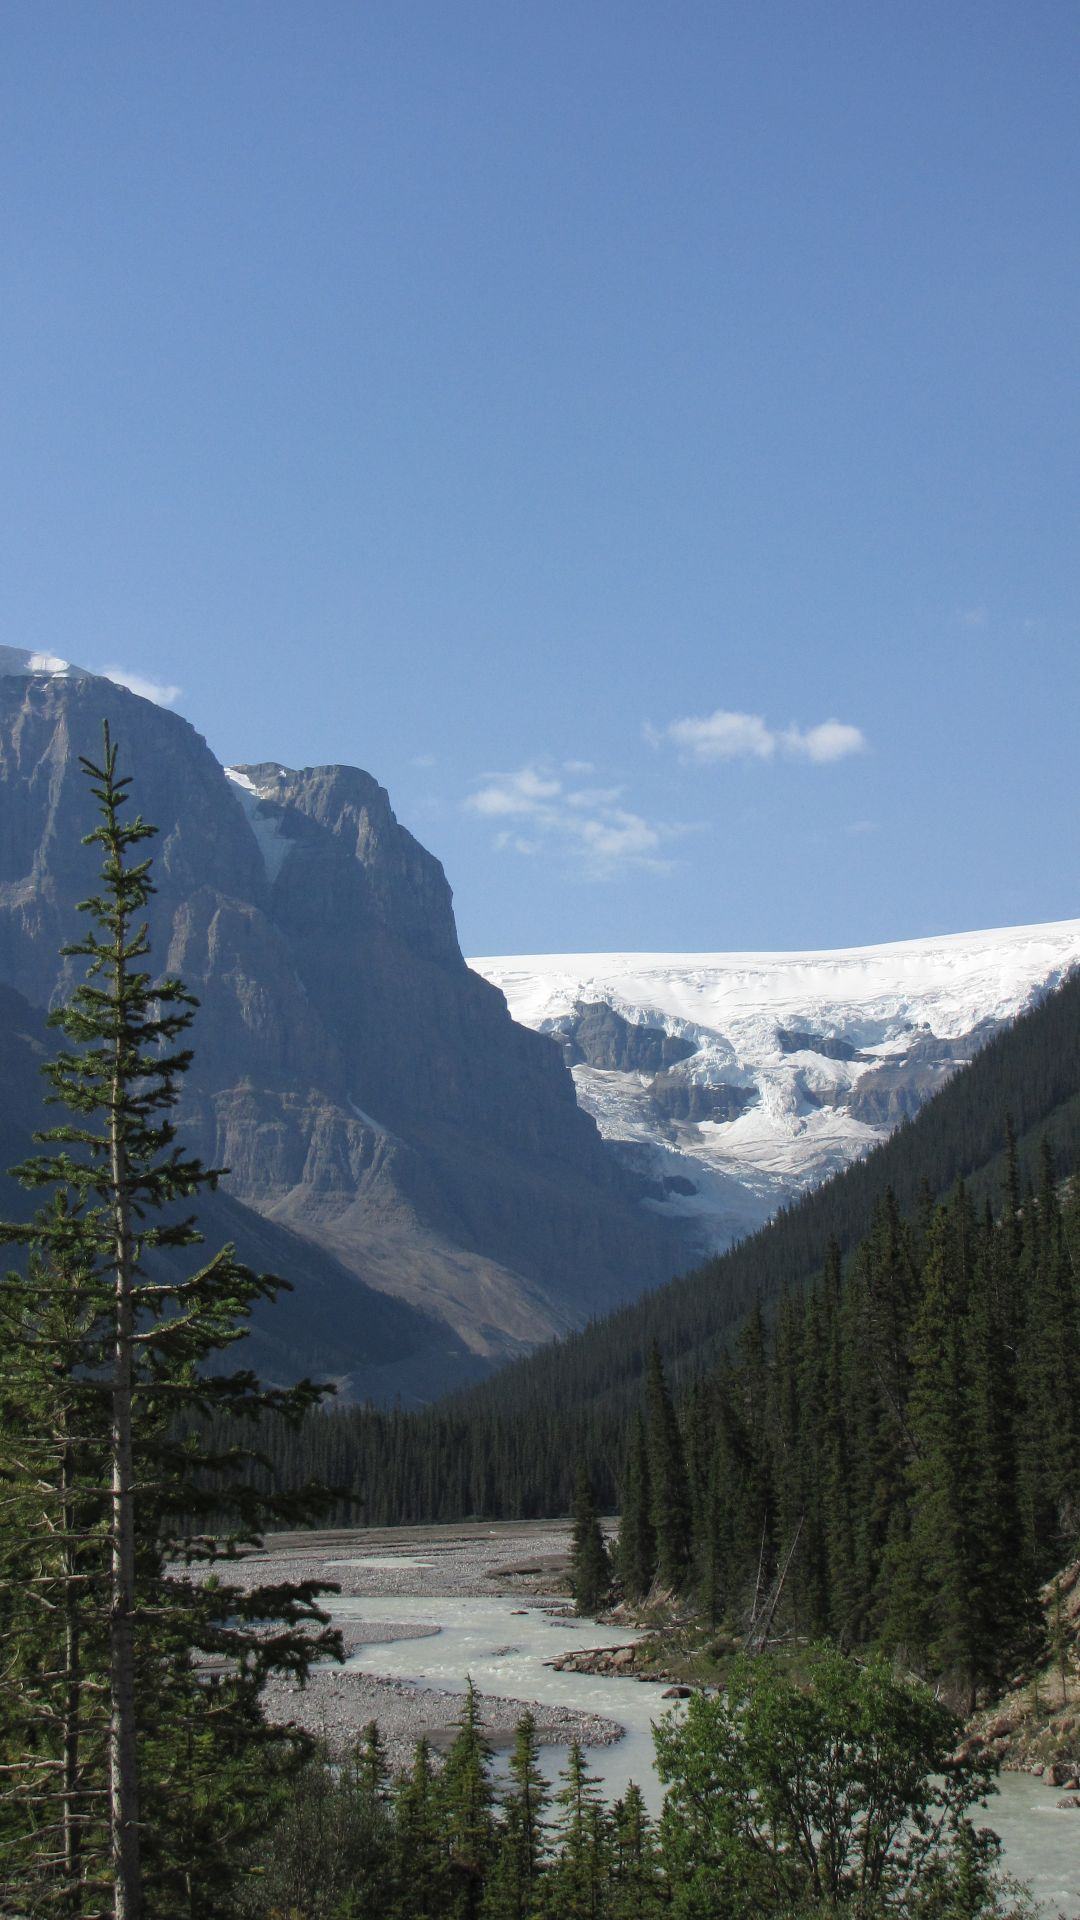 Columbia Icefield, Jasper Nat Pk, Alberta, Canada - yes, its as pretty as they said it would be!